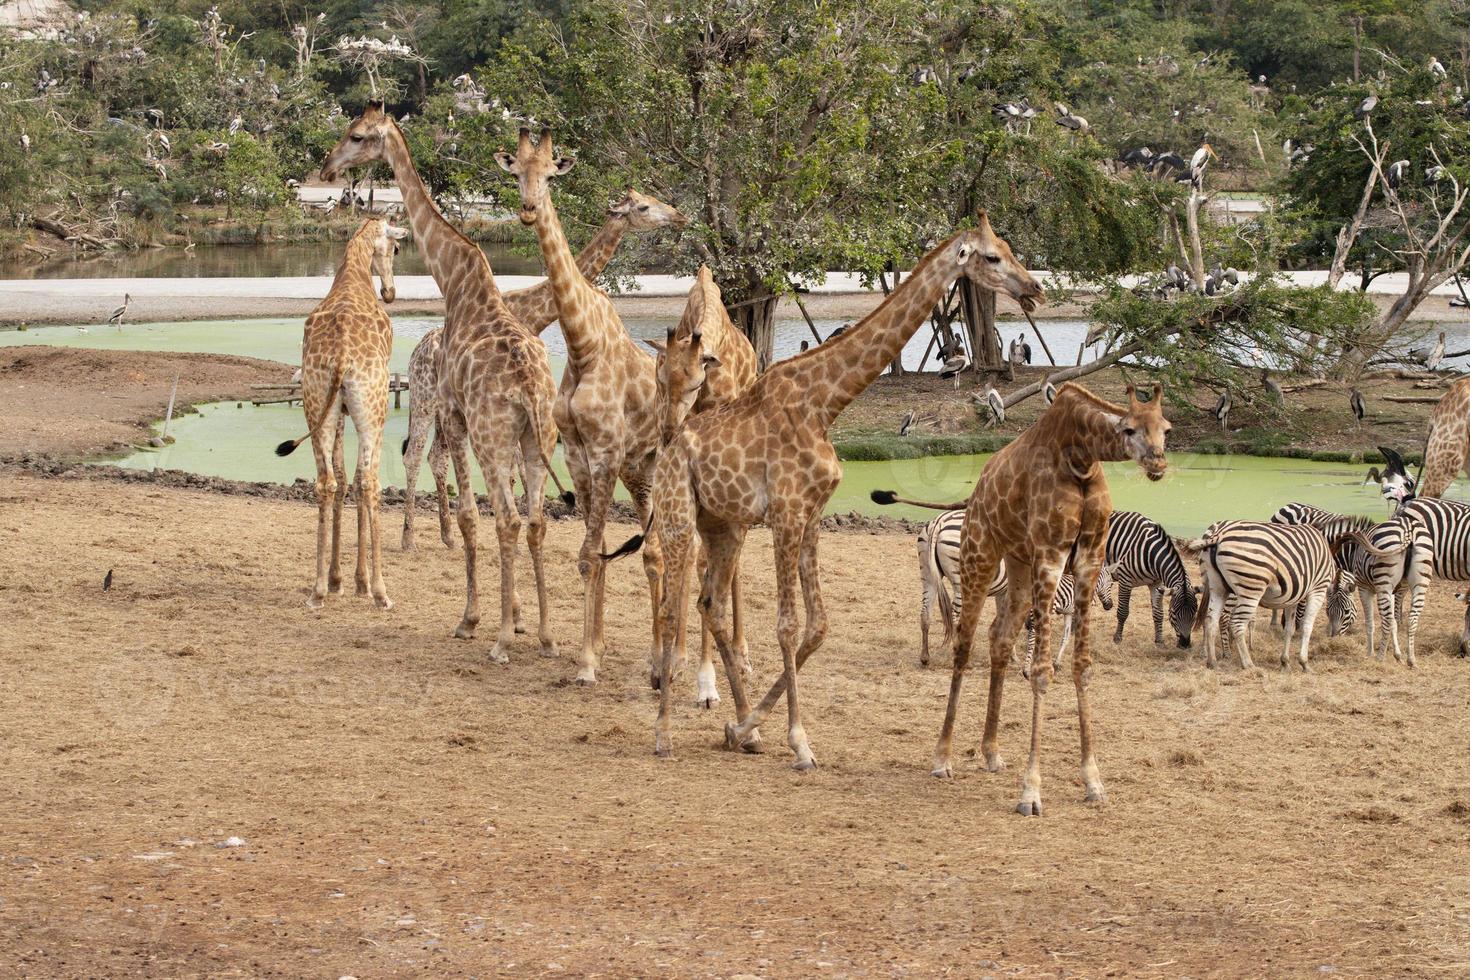 A group of giraffes and they use their long necks to reach leaves, can be found in the African plains photo